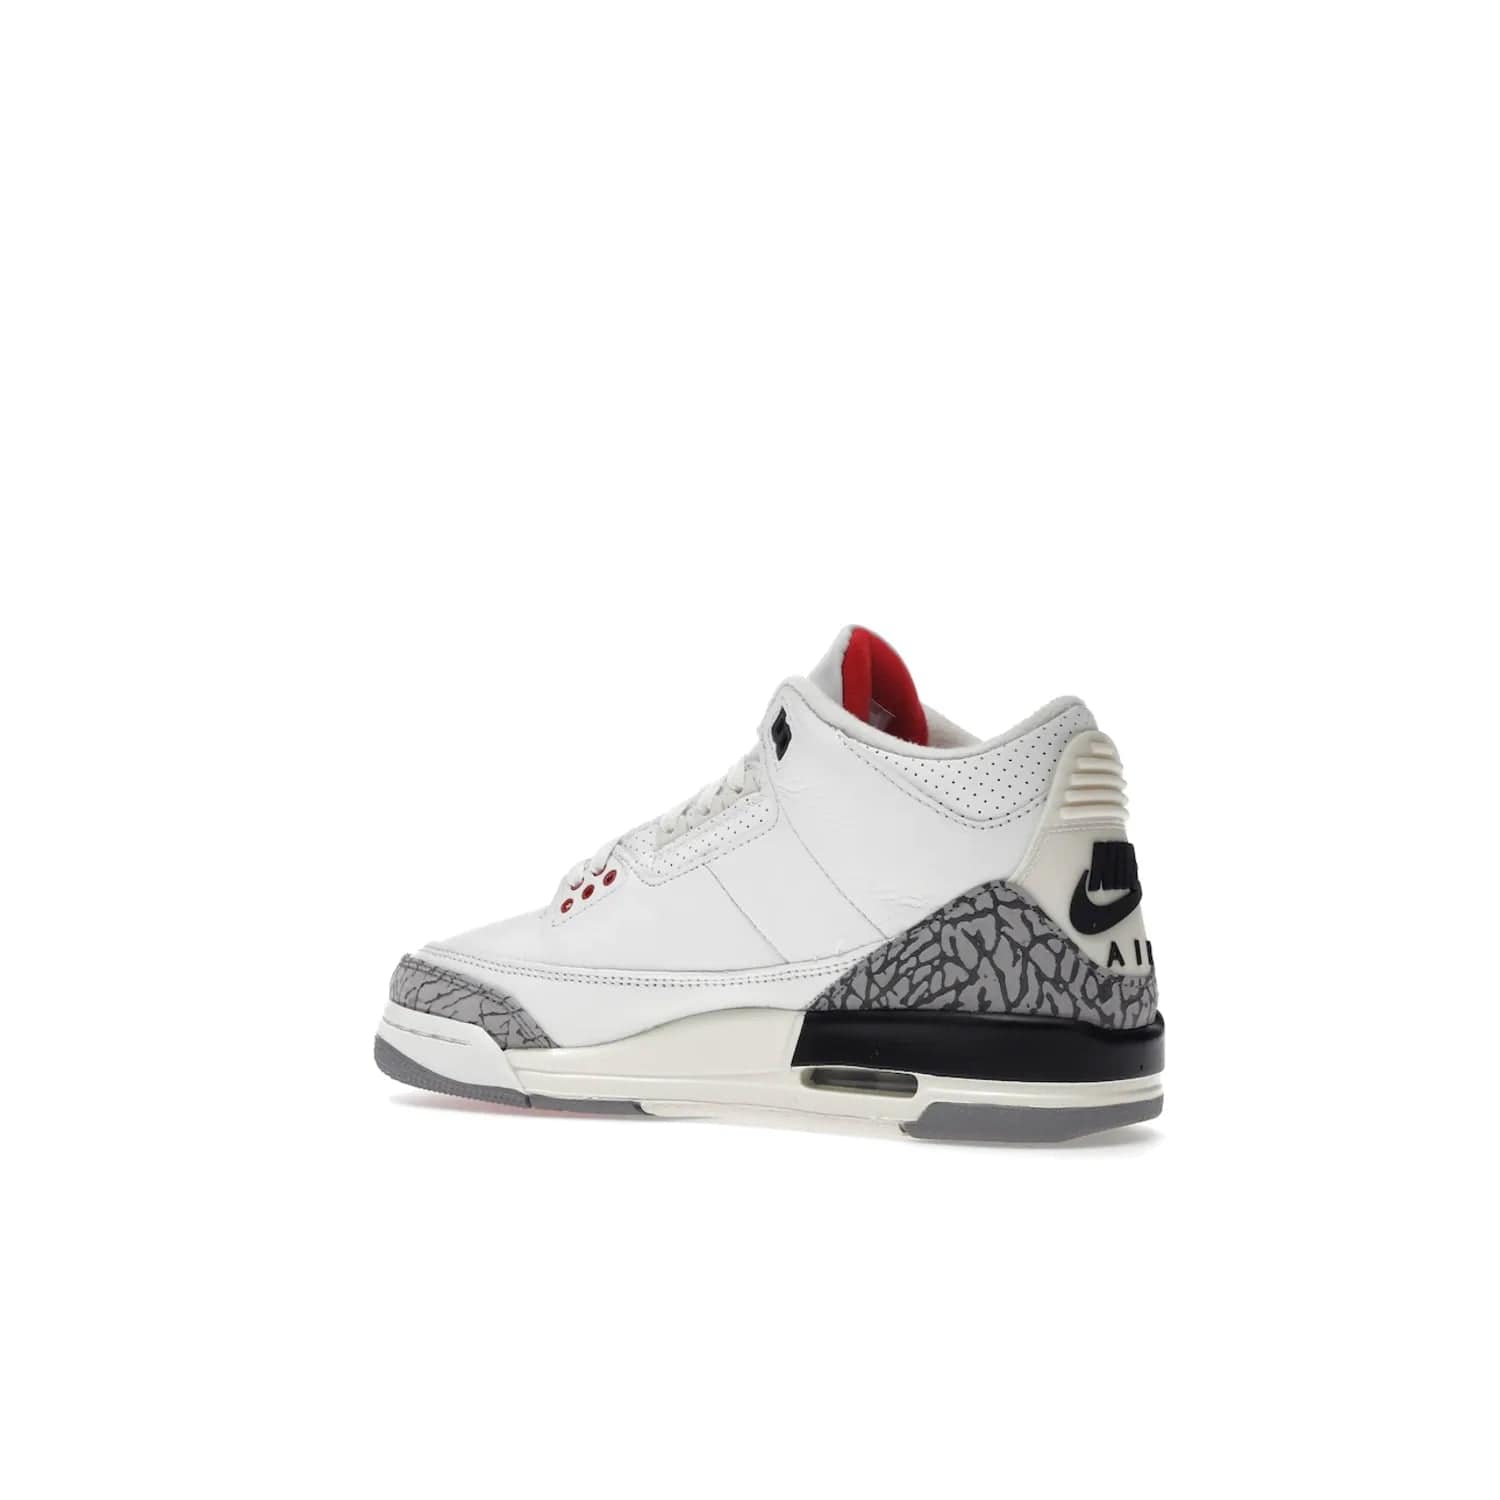 Jordan 3 Retro White Cement Reimagined (GS) - Image 22 - Only at www.BallersClubKickz.com - Grab the perfect blend of modern design and classic style with the Jordan 3 Retro White Cement Reimagined (GS). Features Summit White, Fire Red, Black, and Cement Grey colorway, iconic Jordan logo embroidered on the tongue, and “Nike Air” branding. Limited availability, get your pair before March 11th 2023.